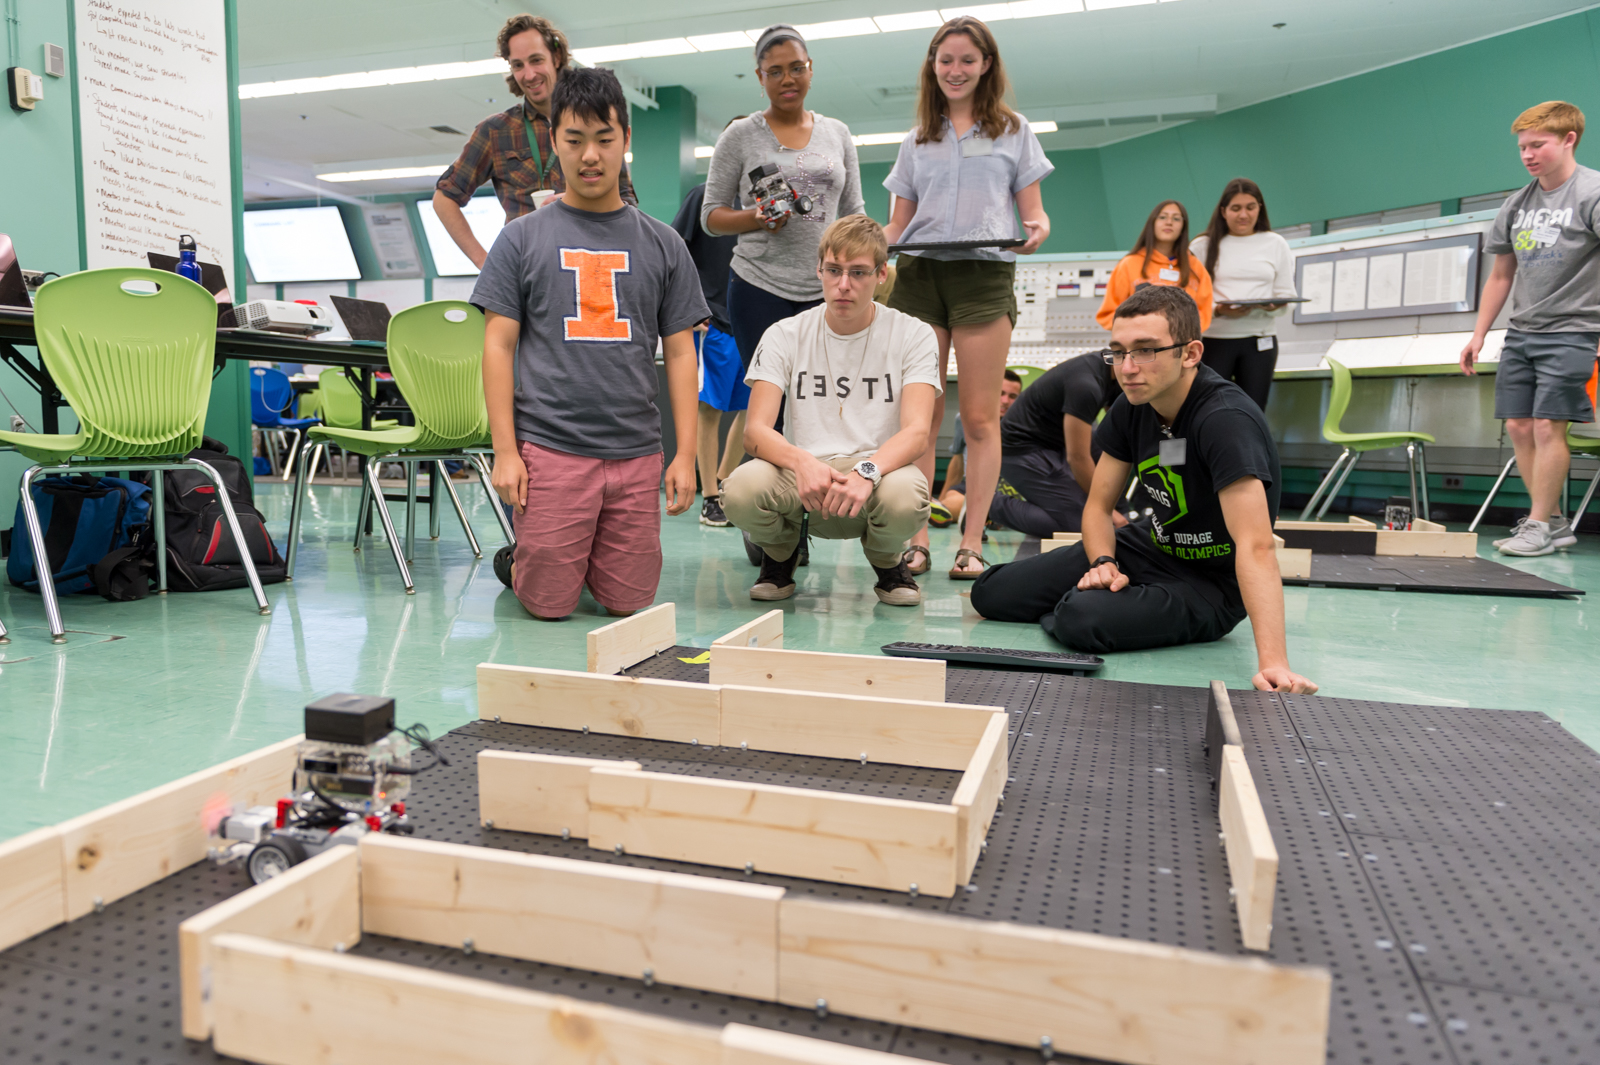 High schoolers monitor their robot’s progress in the second maze on the final afternoon of camp.